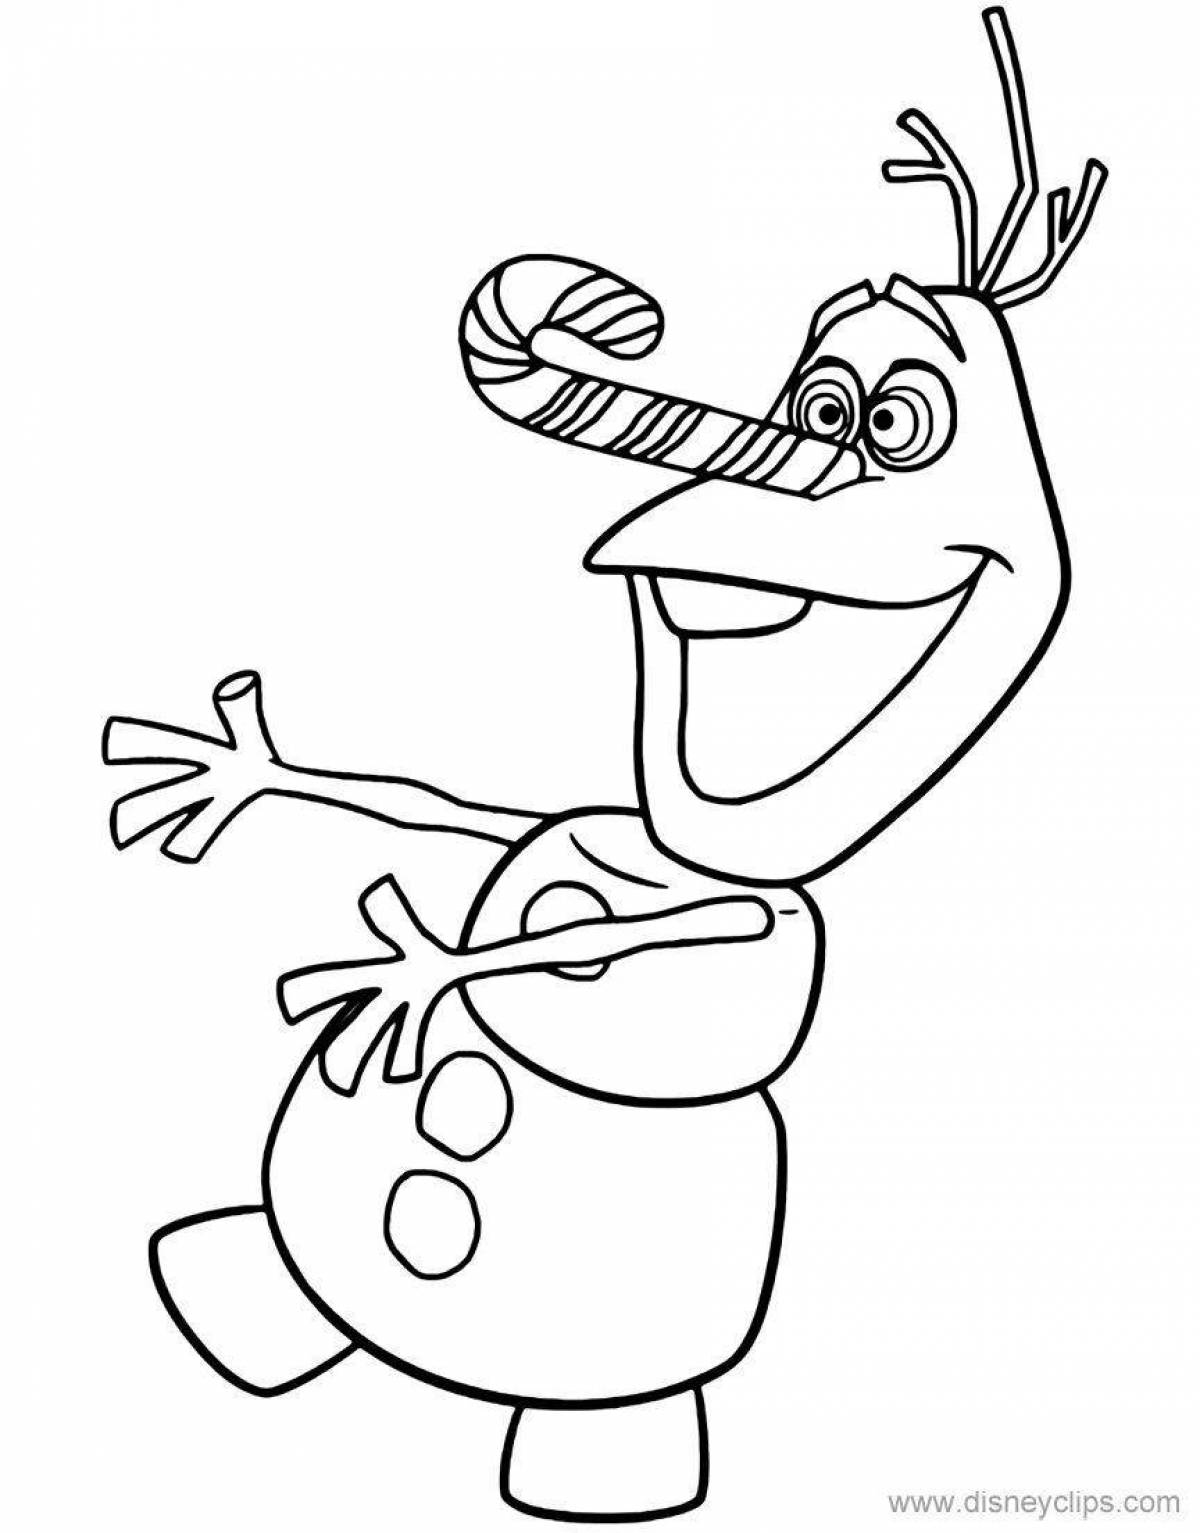 Sparkling olive coloring page